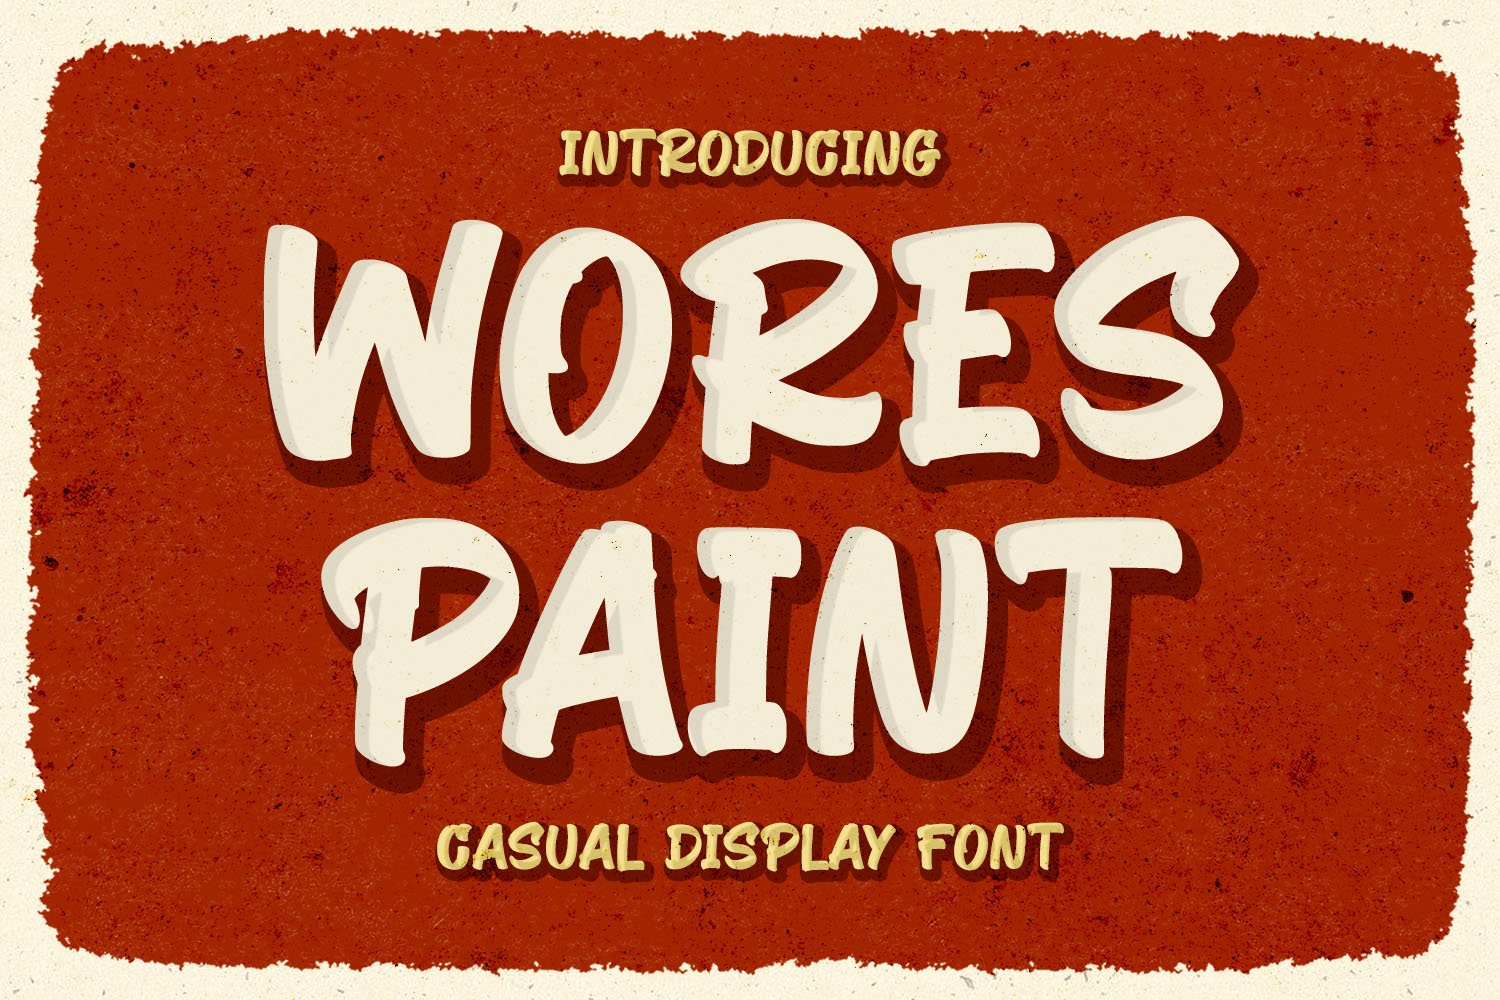 Wores Paint - Retro Display Font cover image.